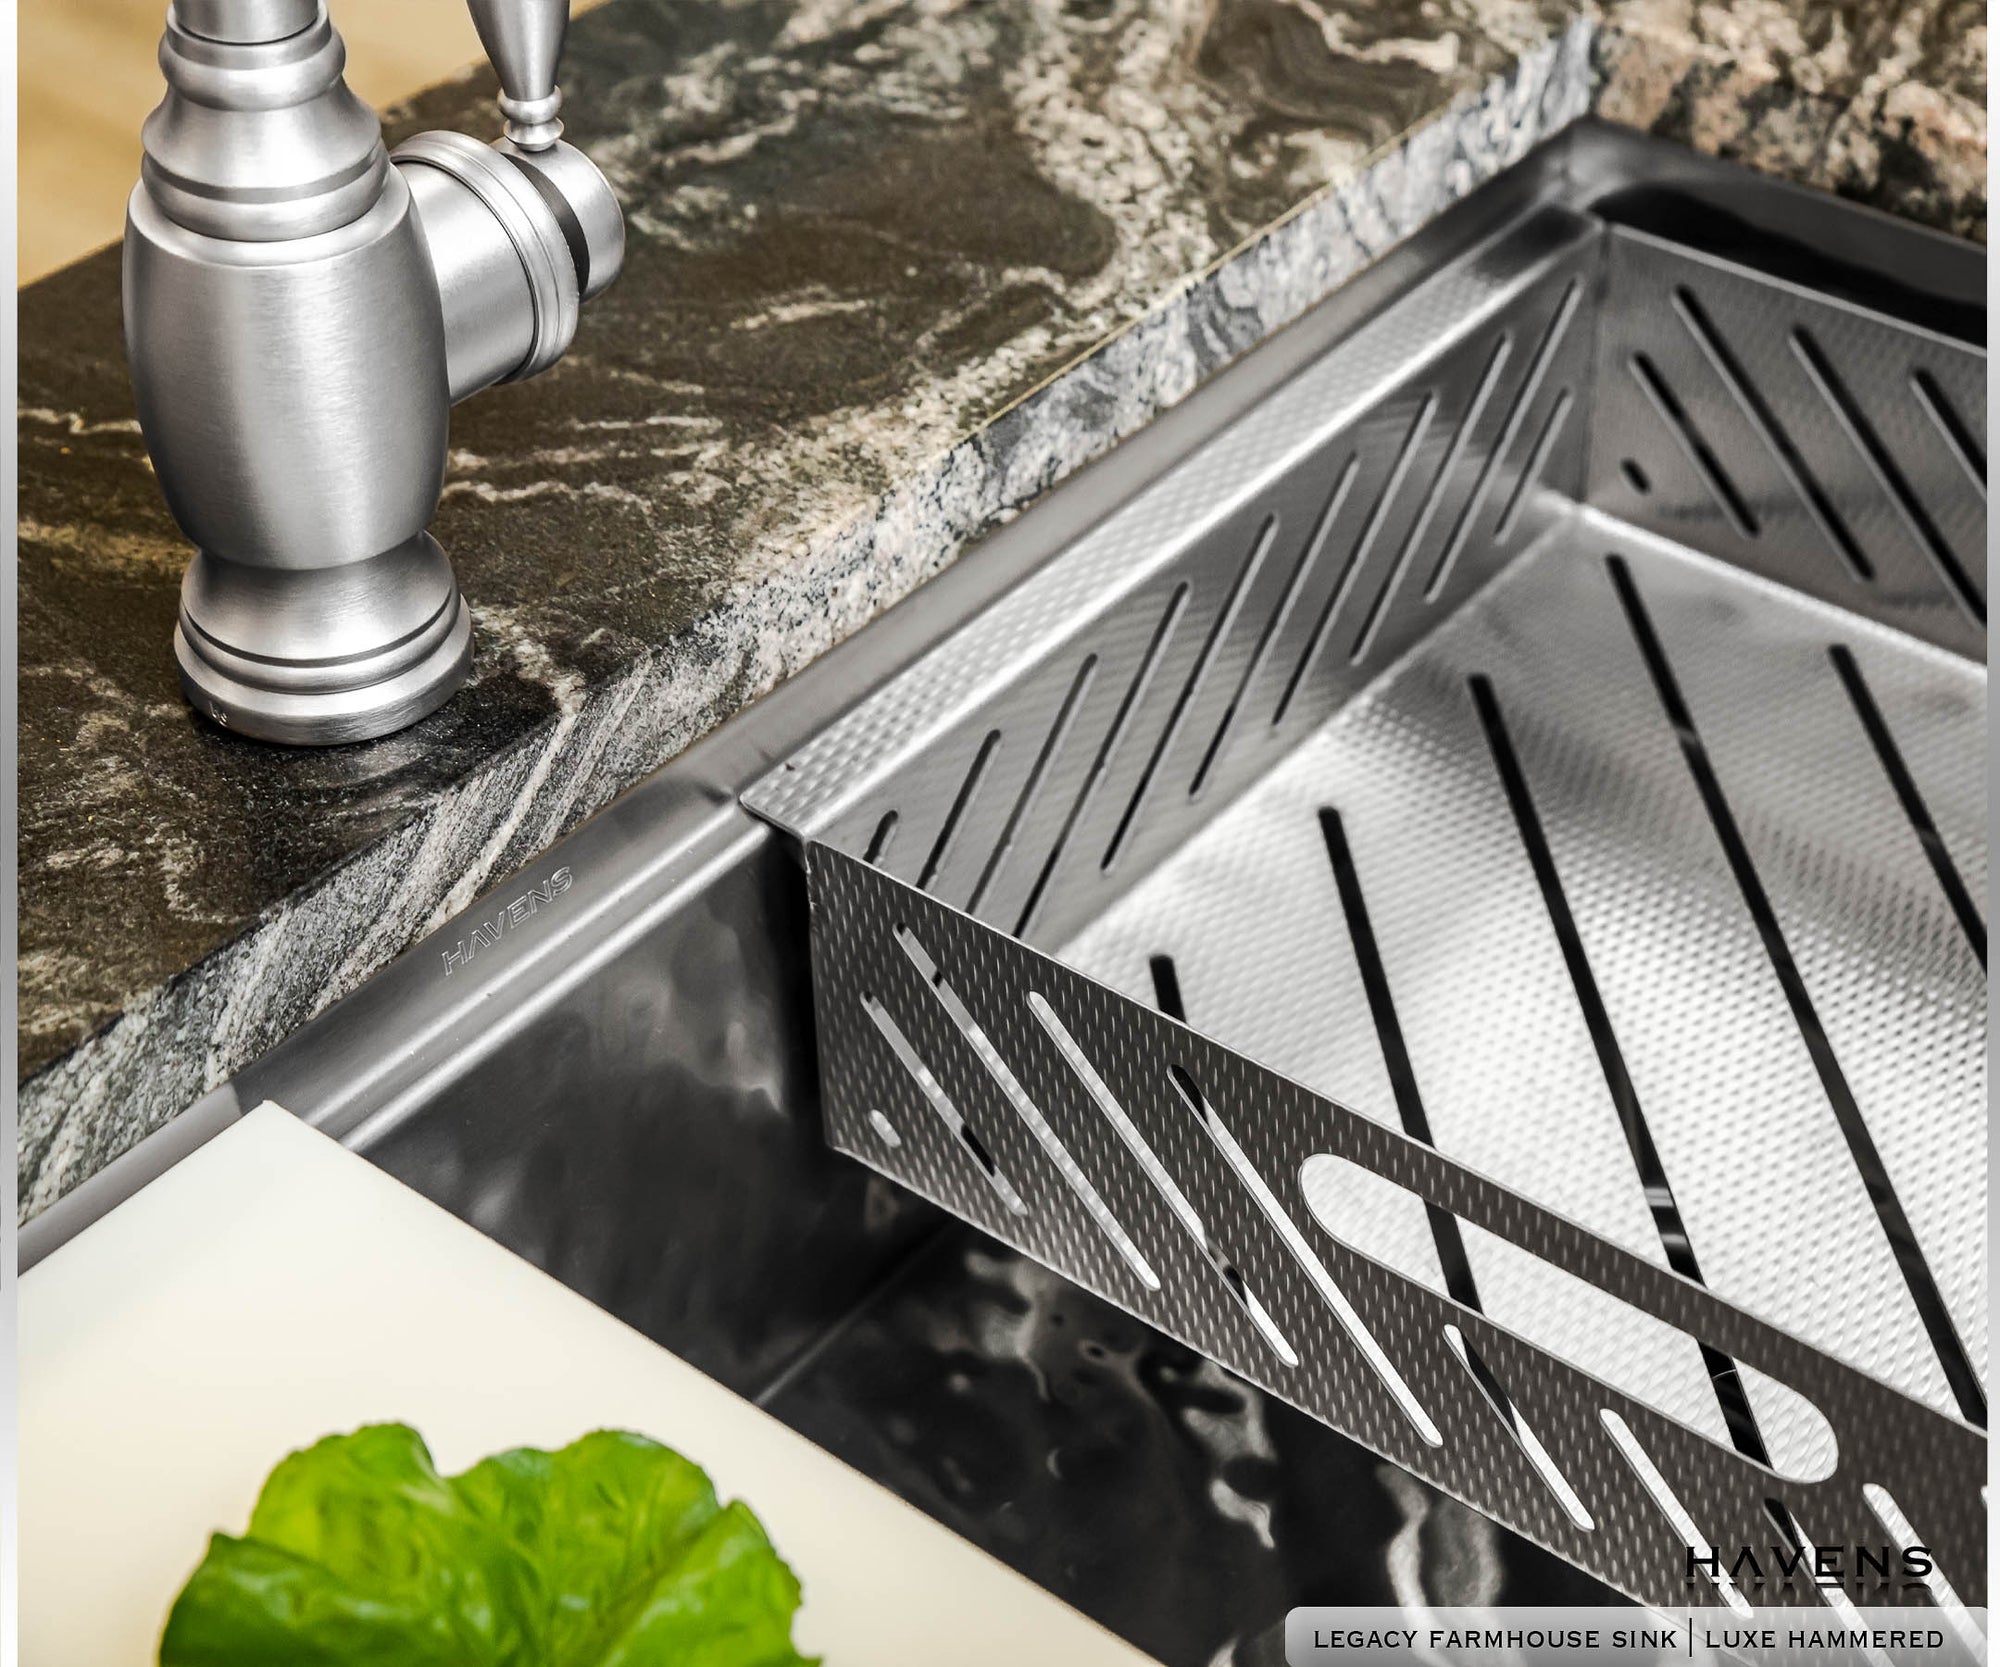 Drop In Strainer, Advanced Sink Accessory - Havens